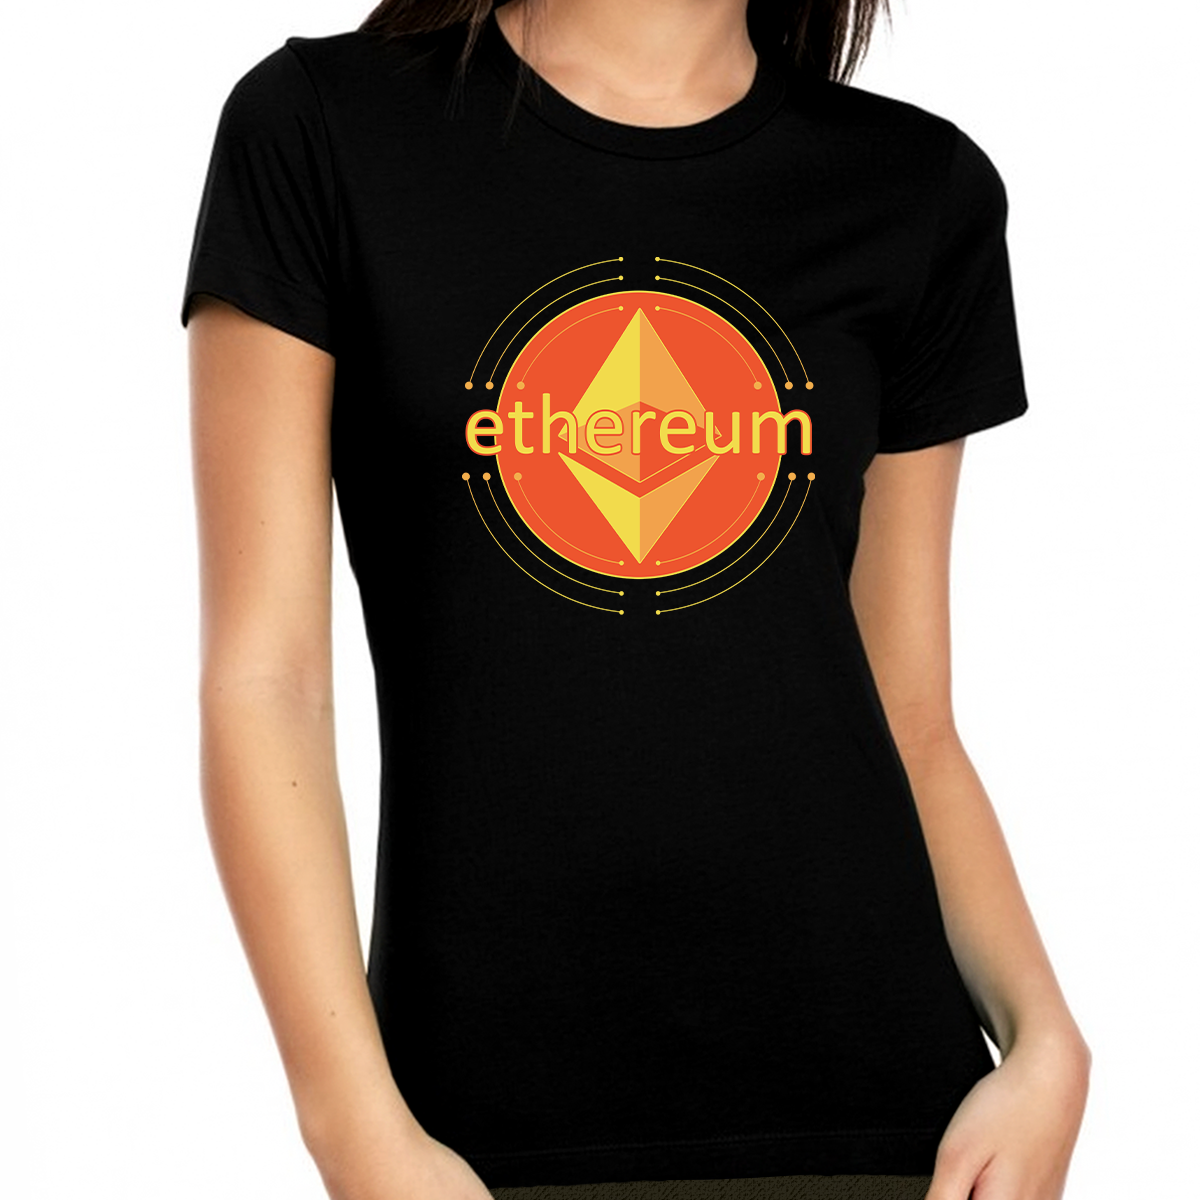 Crypto Shirts for Women Crypto Gifts Ethereum Shirt Cryptocurrency Crypto Shirt Crypto Ethereum Shirt